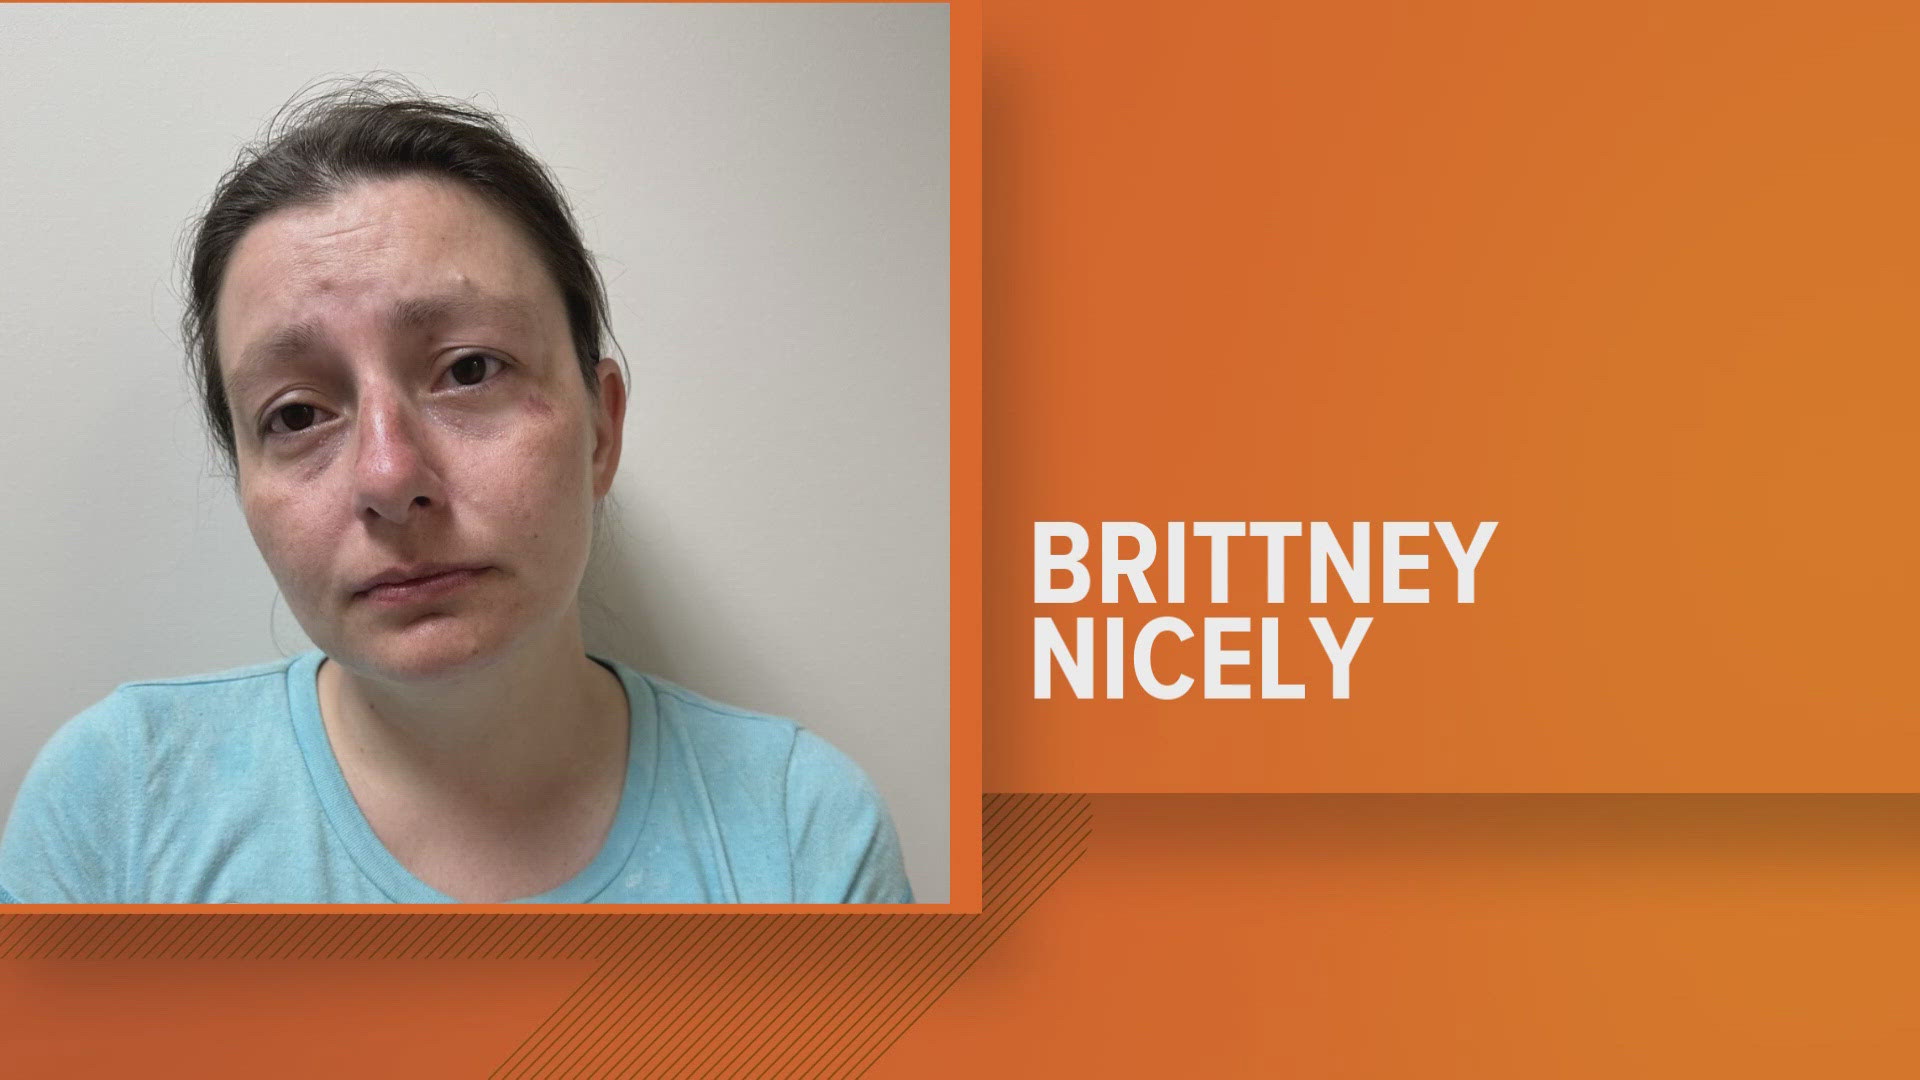 Brittney Nicely, a 35-year-old, allegedly shot and killed Richard Wilburn on Monday, according to the Morristown Police Department.